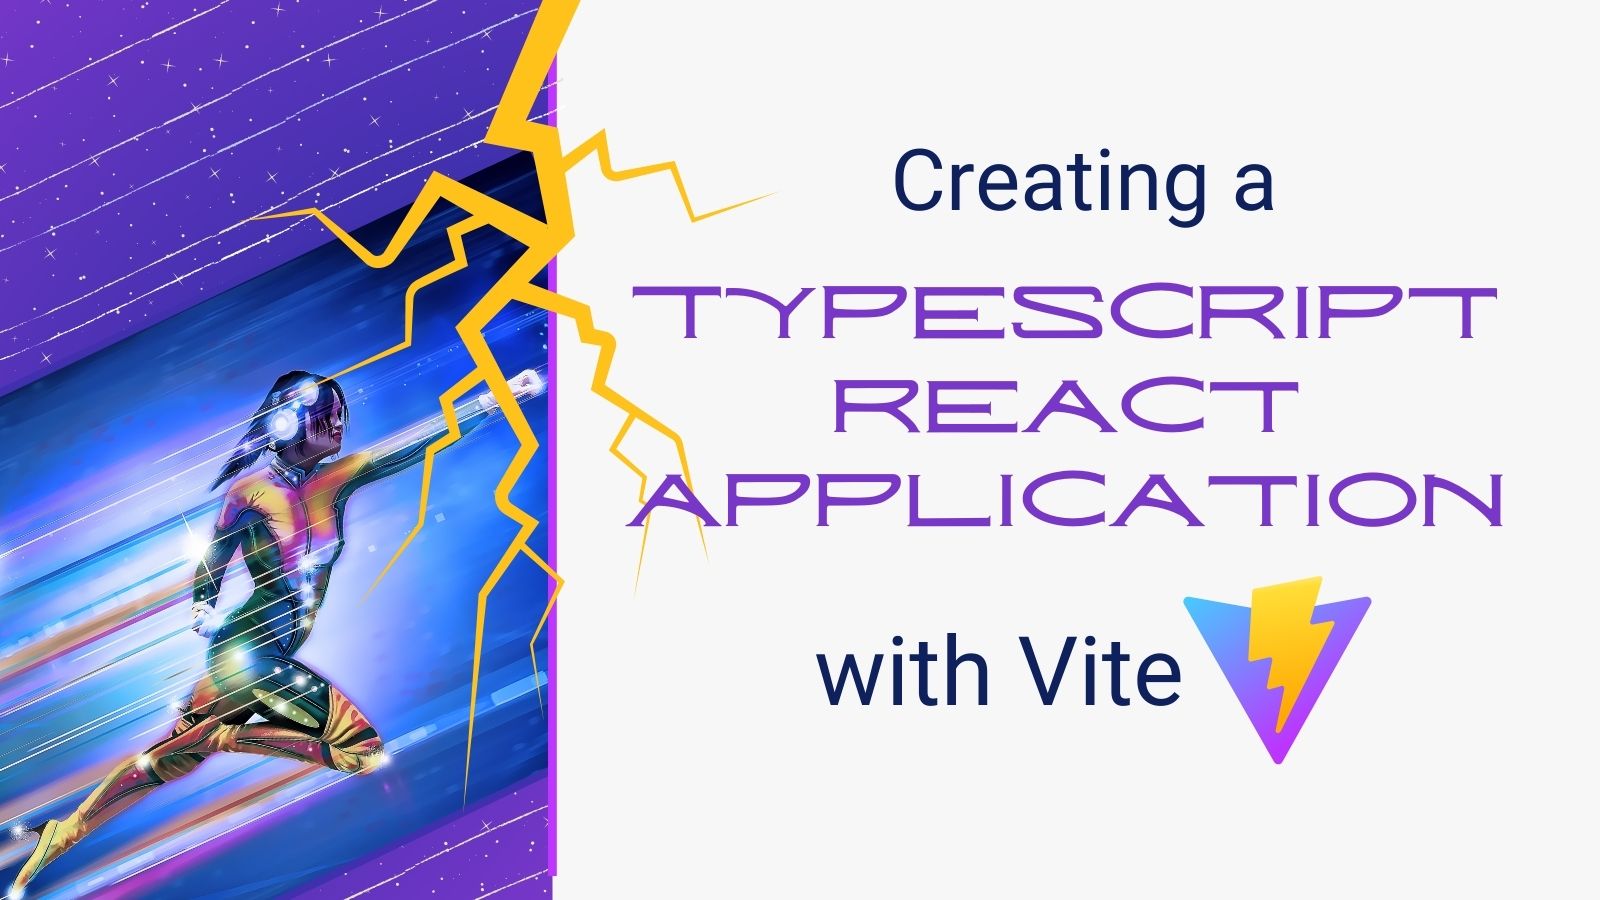 Creating a TypeScript React Application with Vite